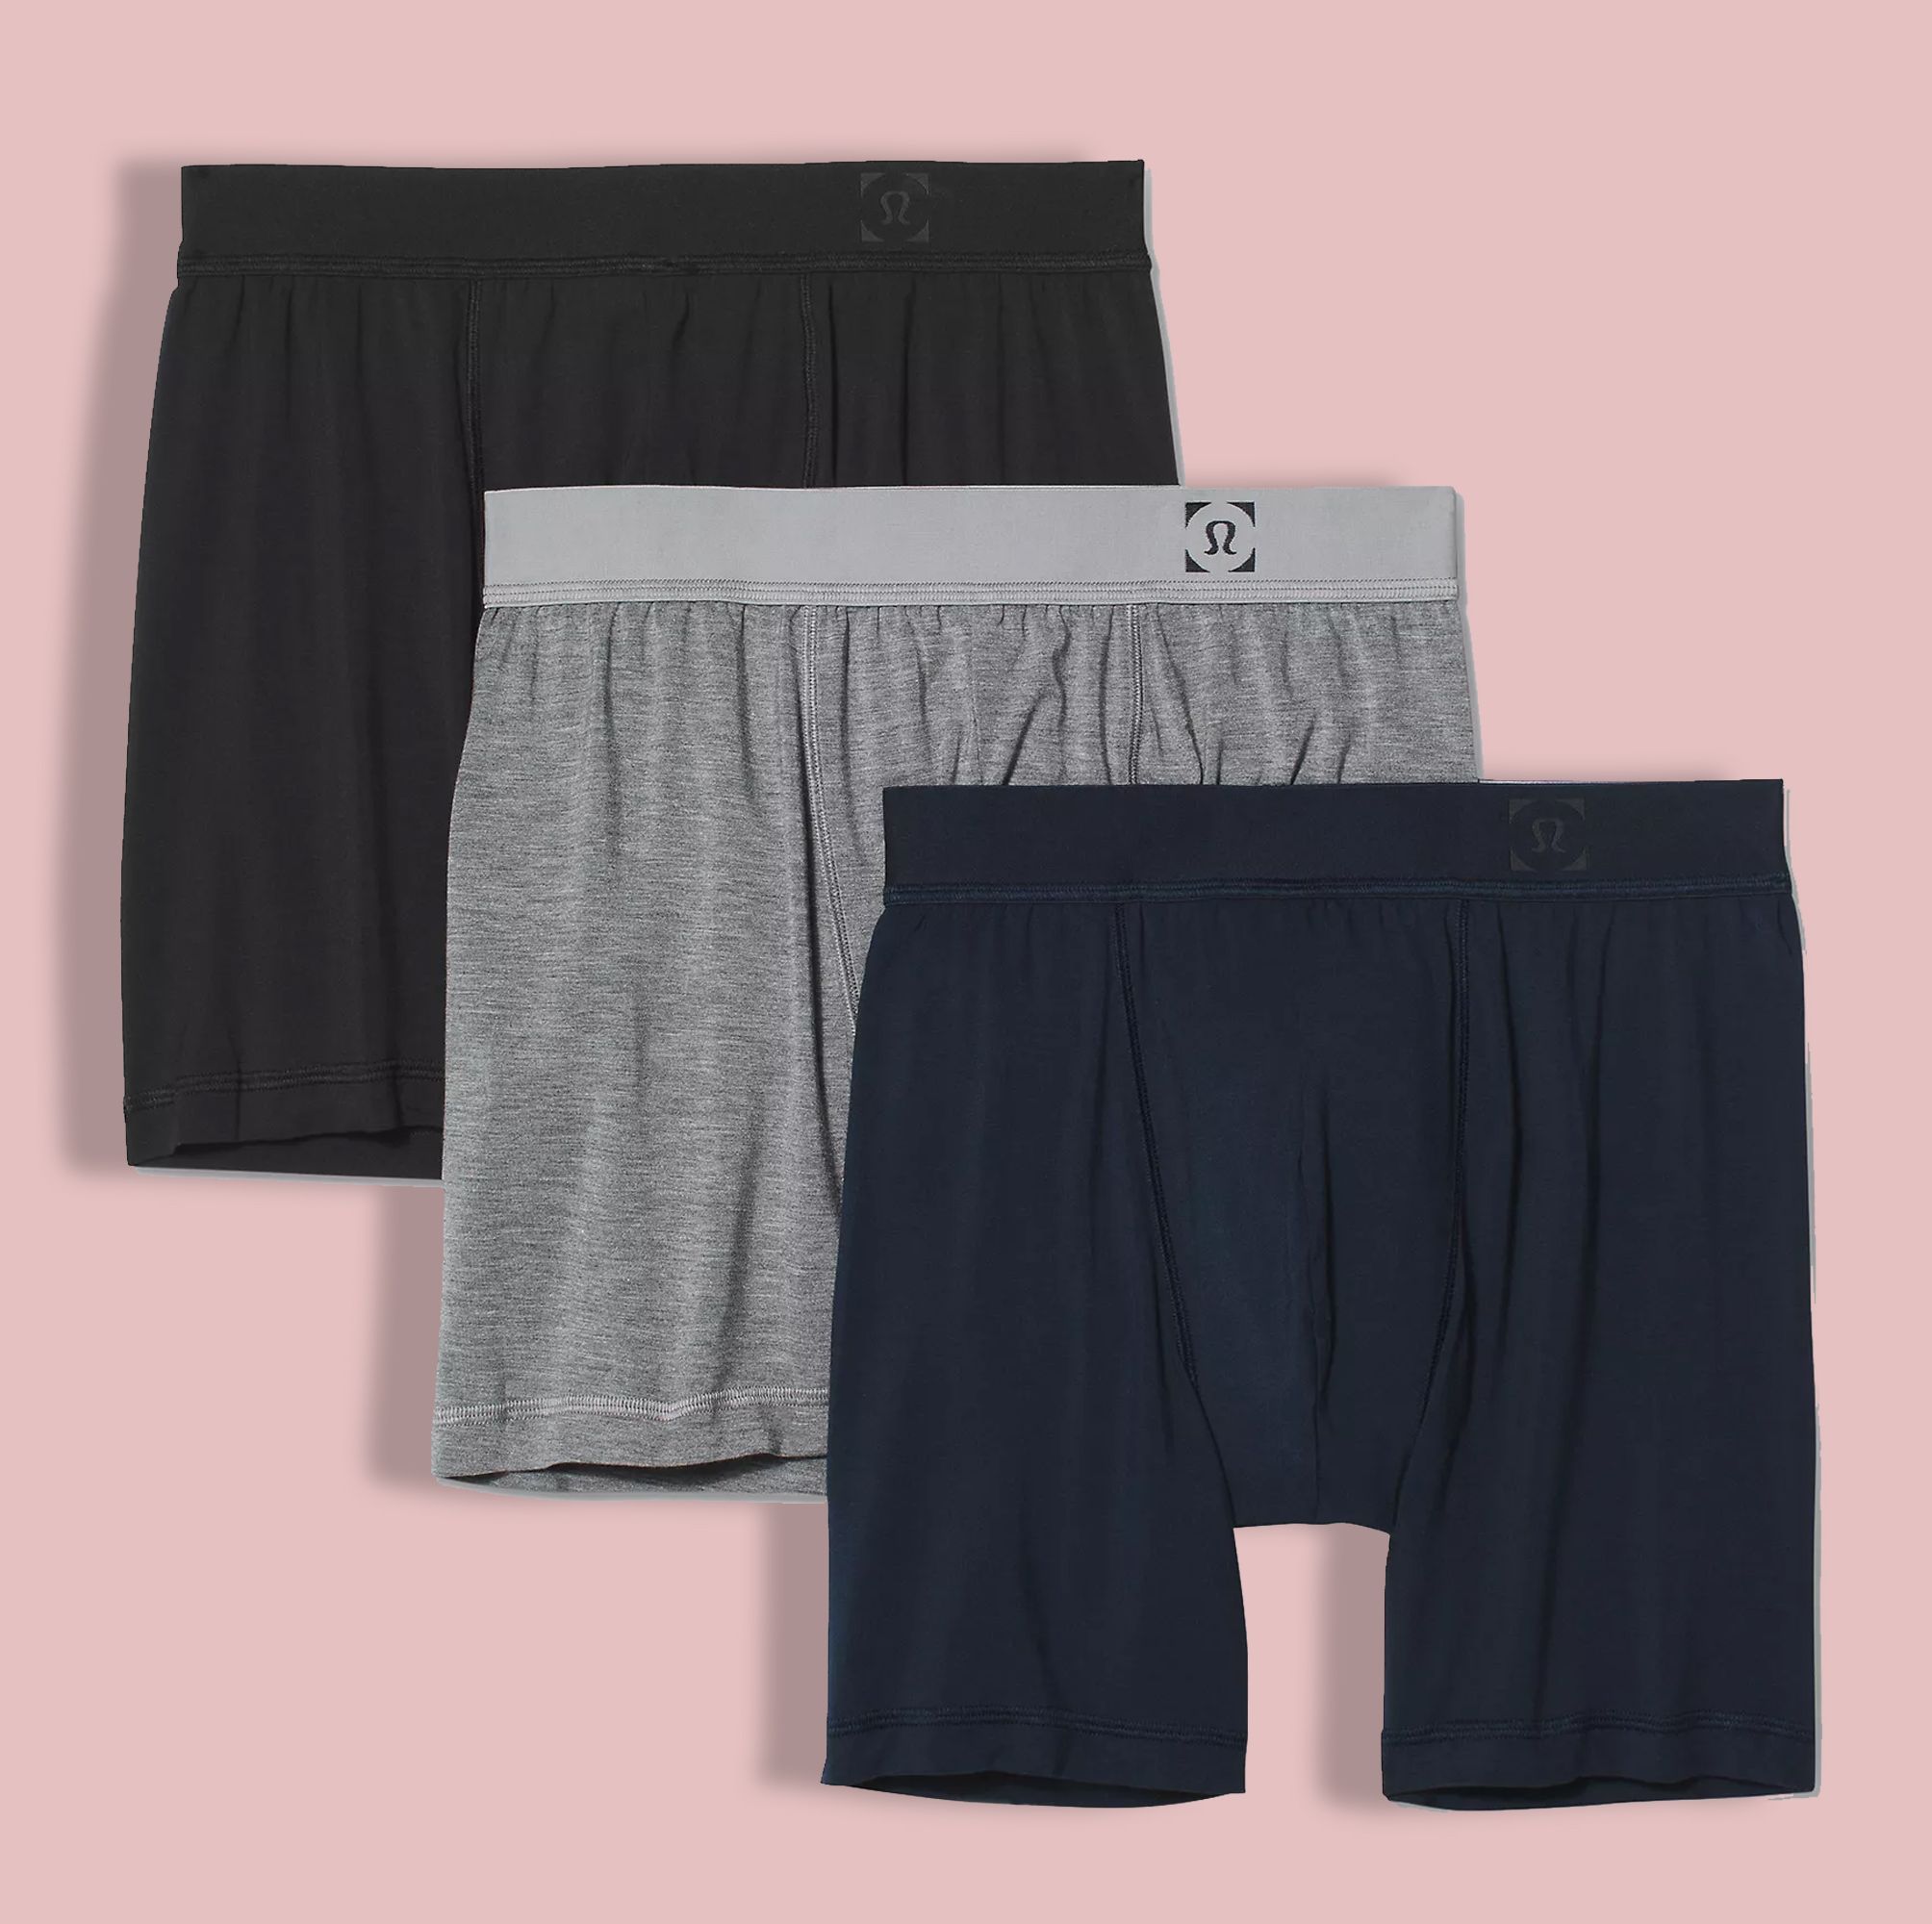 The 19 Best Boxer Shorts to Wear Every Day